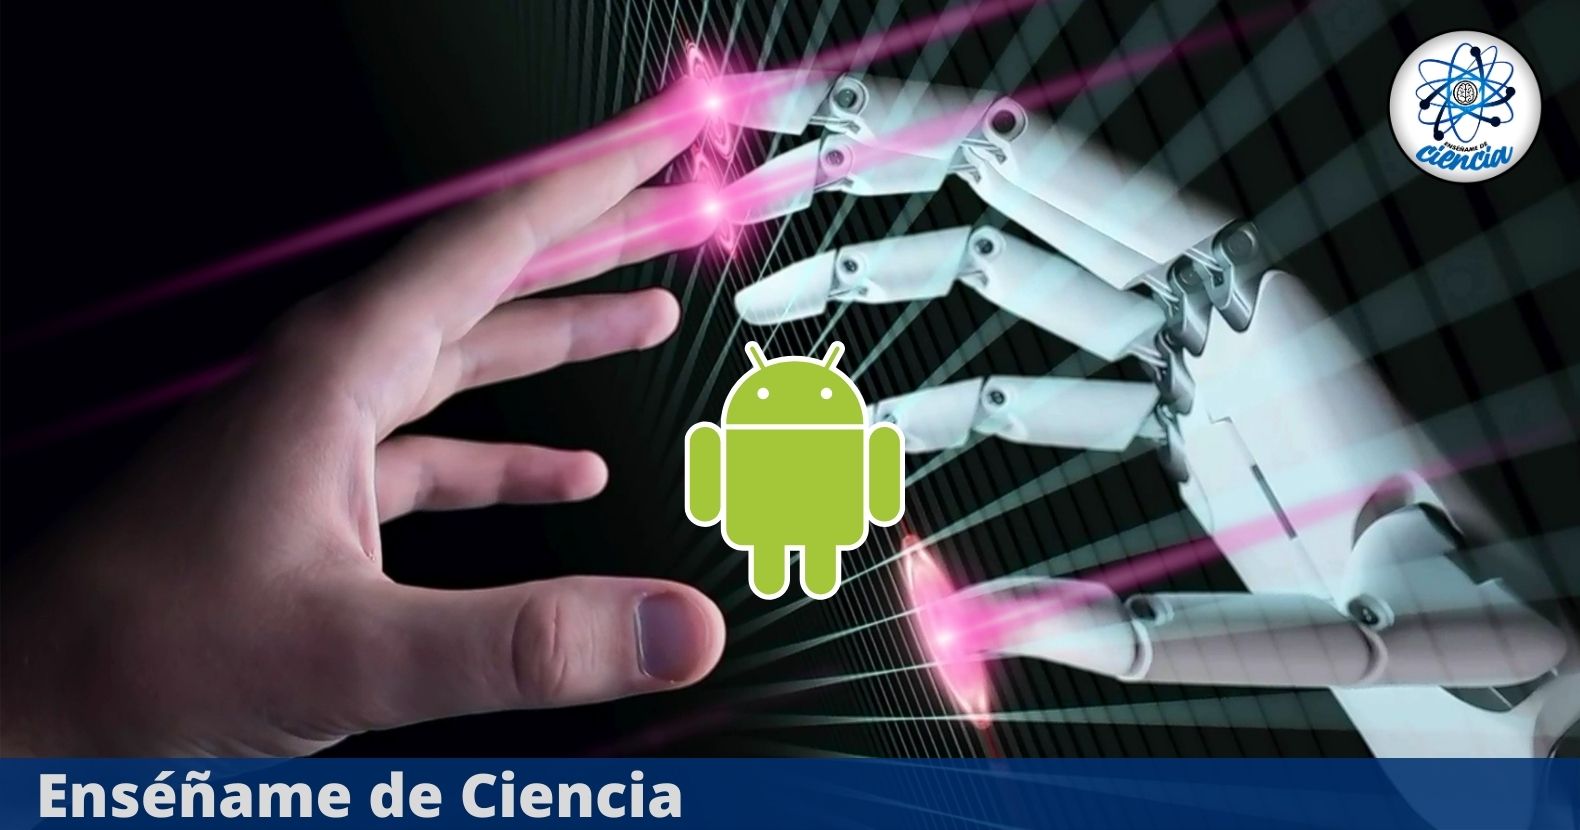 The apps that we all must have on our mobile phones, take note – Enseñame de Ciencia